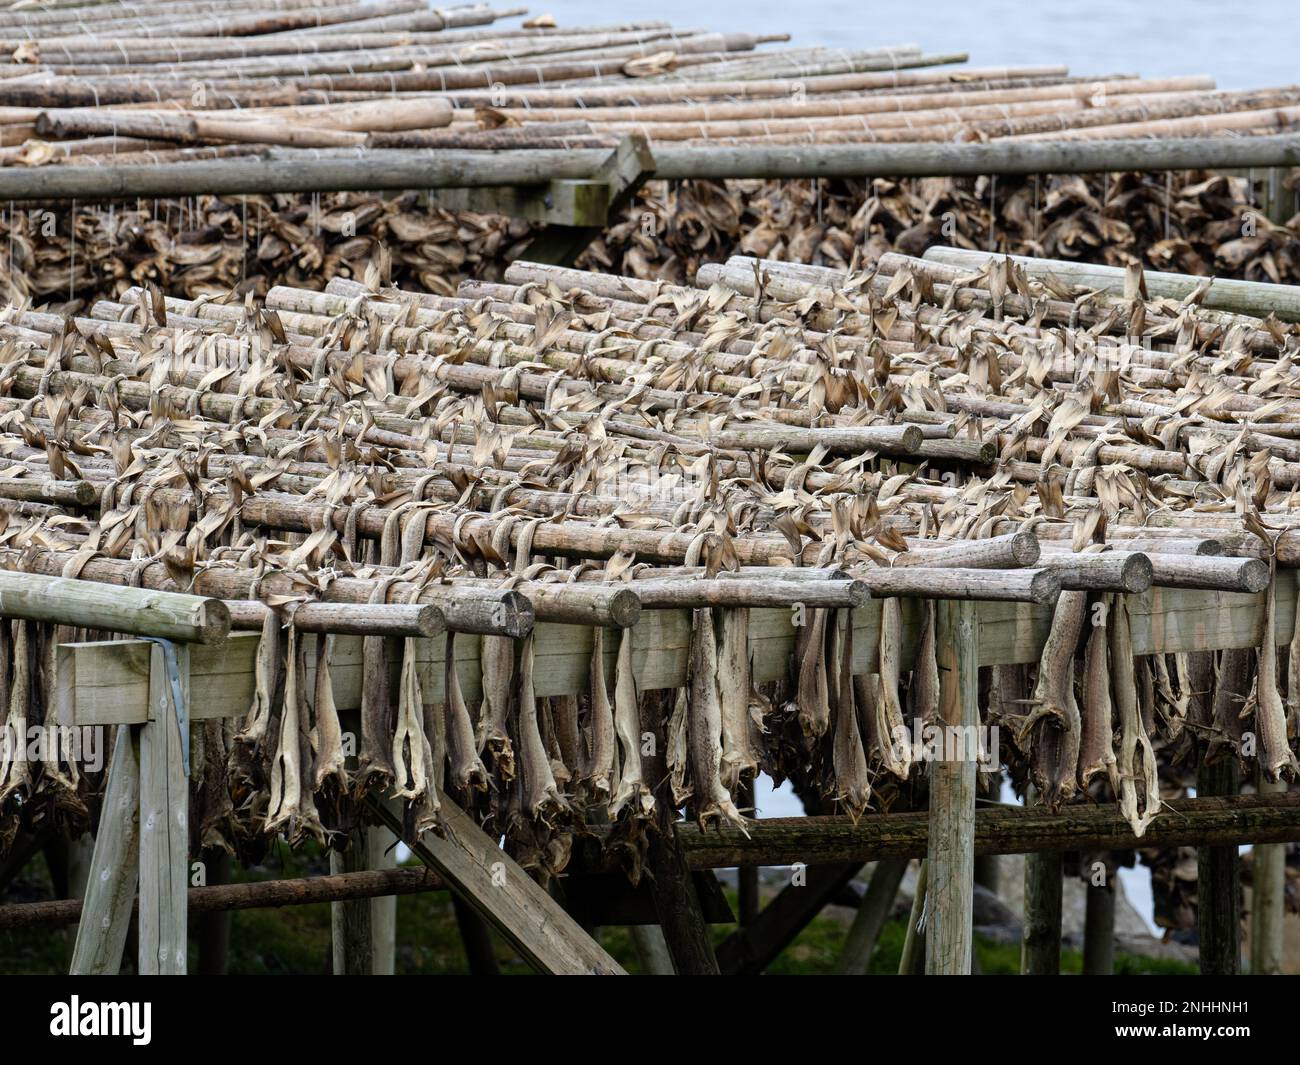 Cod drying on racks to become stockfish in the town of Reine, Moskenesøya in the Lofoten archipelago, Norway. Stock Photo